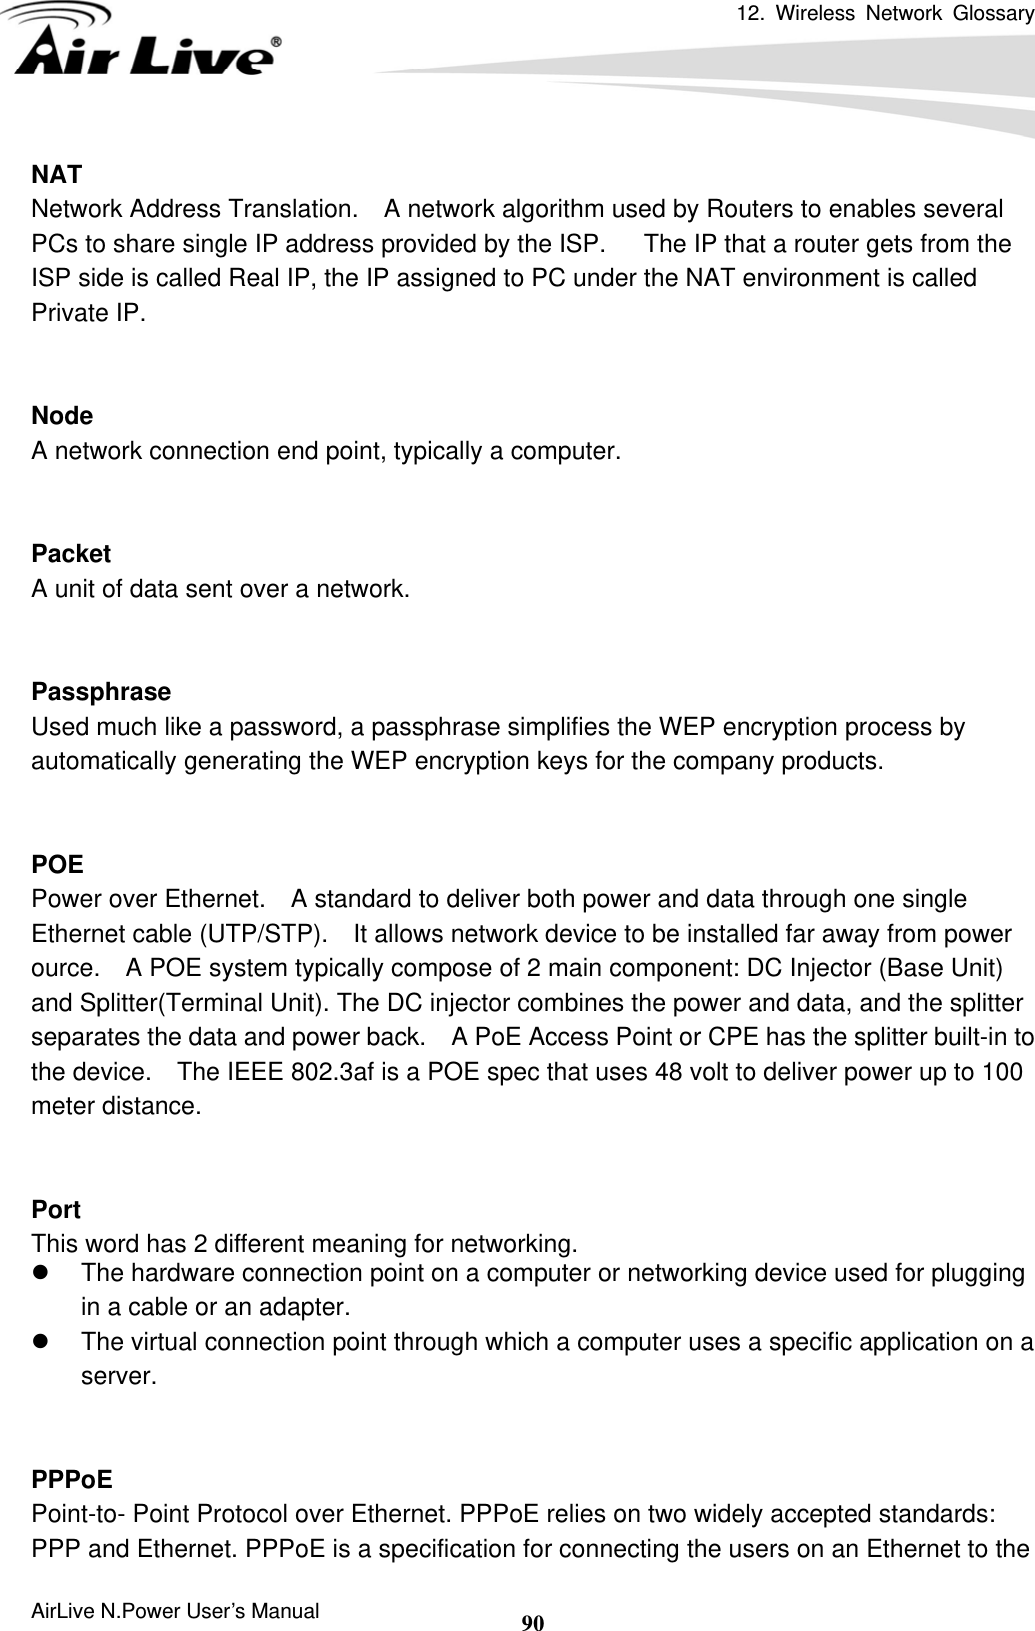 12. Wireless Network Glossary      AirLive N.Power User’s Manual  90NAT Network Address Translation.    A network algorithm used by Routers to enables several PCs to share single IP address provided by the ISP.   The IP that a router gets from the ISP side is called Real IP, the IP assigned to PC under the NAT environment is called Private IP.   Node A network connection end point, typically a computer.   Packet A unit of data sent over a network.   Passphrase Used much like a password, a passphrase simplifies the WEP encryption process by automatically generating the WEP encryption keys for the company products.   POE Power over Ethernet.    A standard to deliver both power and data through one single Ethernet cable (UTP/STP).    It allows network device to be installed far away from power ource.    A POE system typically compose of 2 main component: DC Injector (Base Unit) and Splitter(Terminal Unit). The DC injector combines the power and data, and the splitter separates the data and power back.    A PoE Access Point or CPE has the splitter built-in to the device.    The IEEE 802.3af is a POE spec that uses 48 volt to deliver power up to 100 meter distance.   Port This word has 2 different meaning for networking. z  The hardware connection point on a computer or networking device used for plugging in a cable or an adapter. z  The virtual connection point through which a computer uses a specific application on a server.   PPPoE Point-to- Point Protocol over Ethernet. PPPoE relies on two widely accepted standards: PPP and Ethernet. PPPoE is a specification for connecting the users on an Ethernet to the 